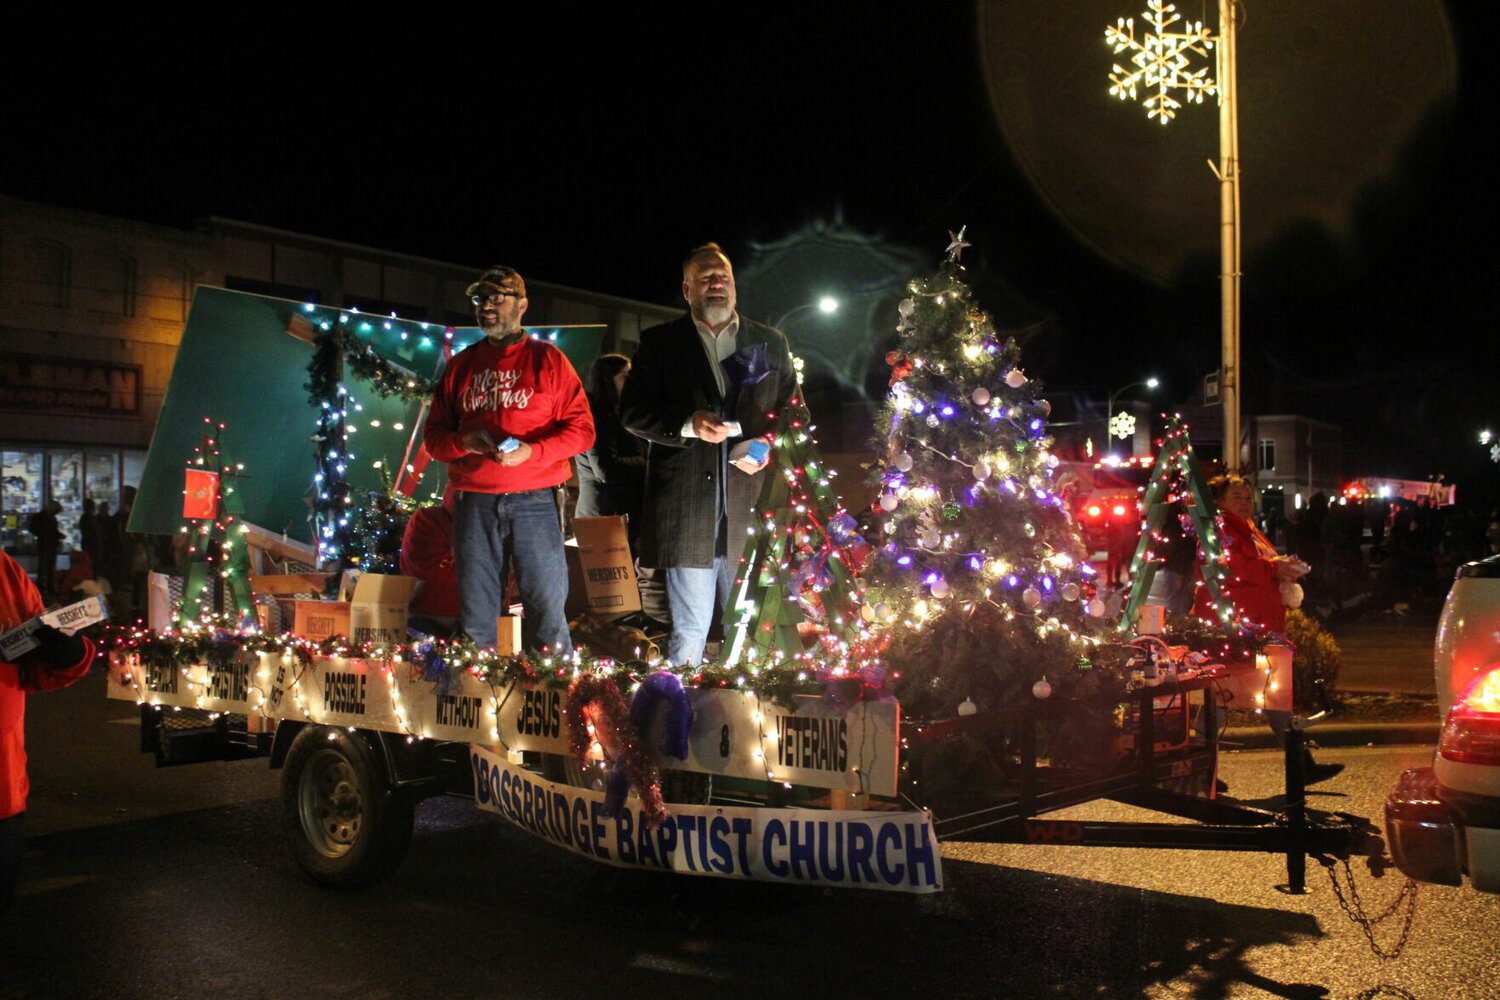 Helping spread the holiday cheer during the Marshfield parade is Judge Justin Evans atop the lighted Crossbridge Baptist Church float.